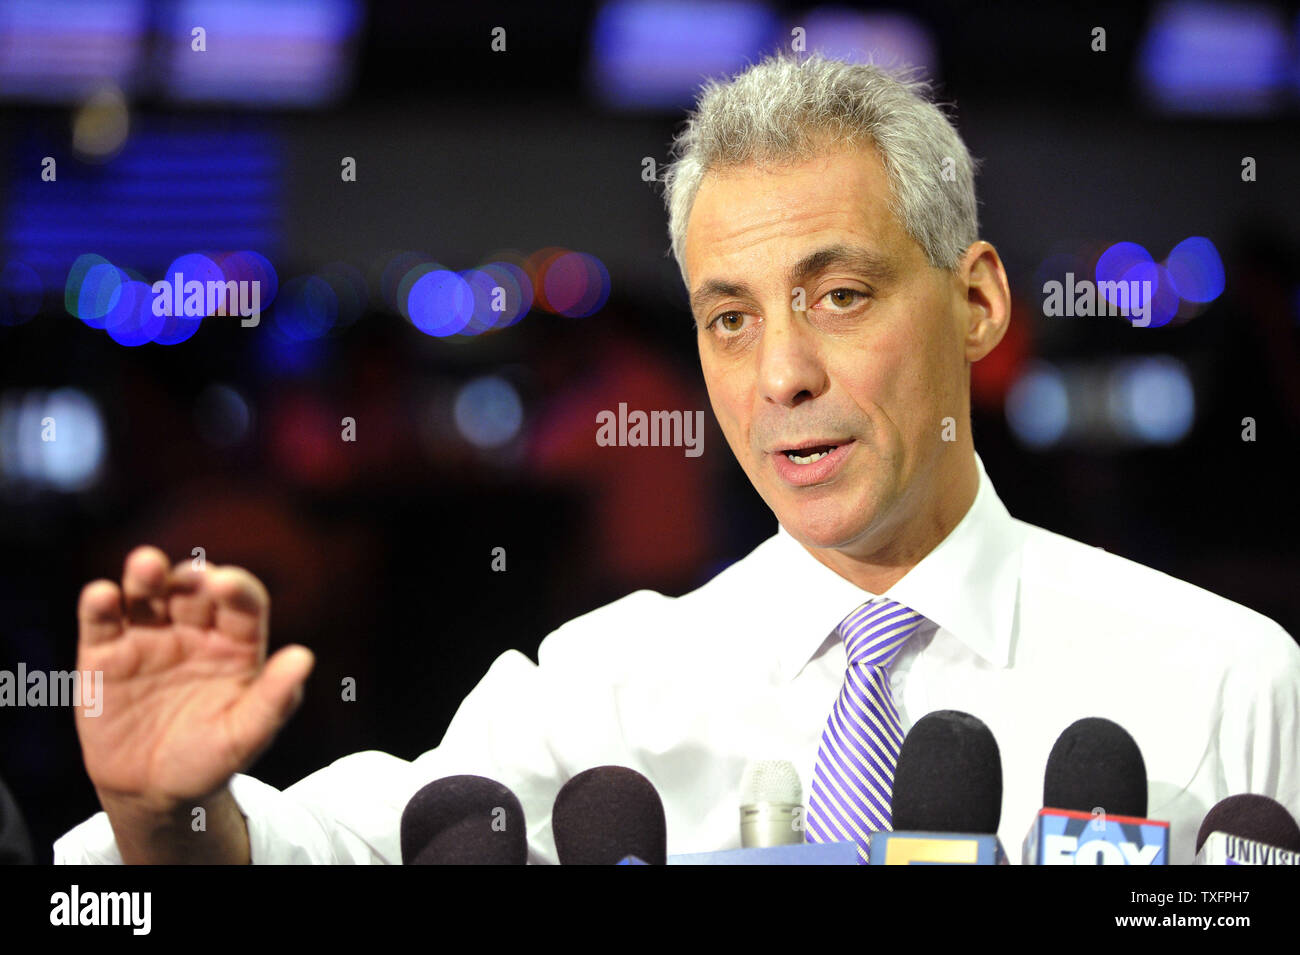 Chicago mayoral candidate Rahm Emanuel talks to reporters at a bowling alley in Chicago on January 24, 2011. An Illinois appellate court threw the former congressman and White House chief of staff off the ballot ruling that he did not meet the residency requirements to run for mayor of Chicago.      UPI/Brian Kersey Stock Photo